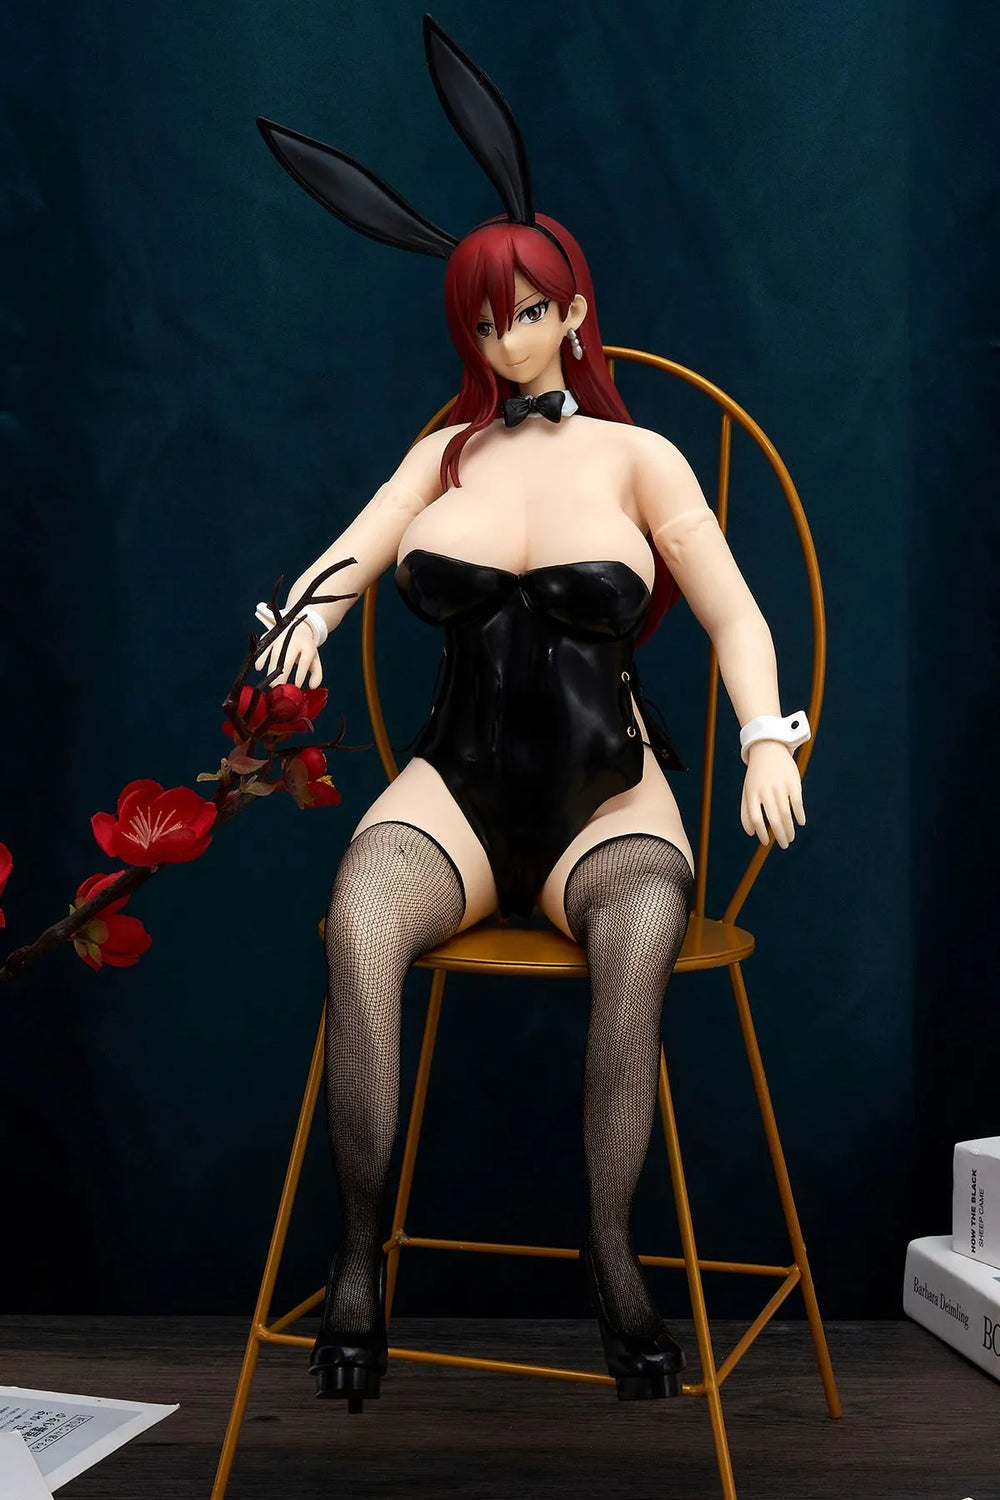 Hentai bunny figure Erza Scarlet sitting on a chair like a queen, this is a cast off Fairy Tail figure and anime flehslight sex doll